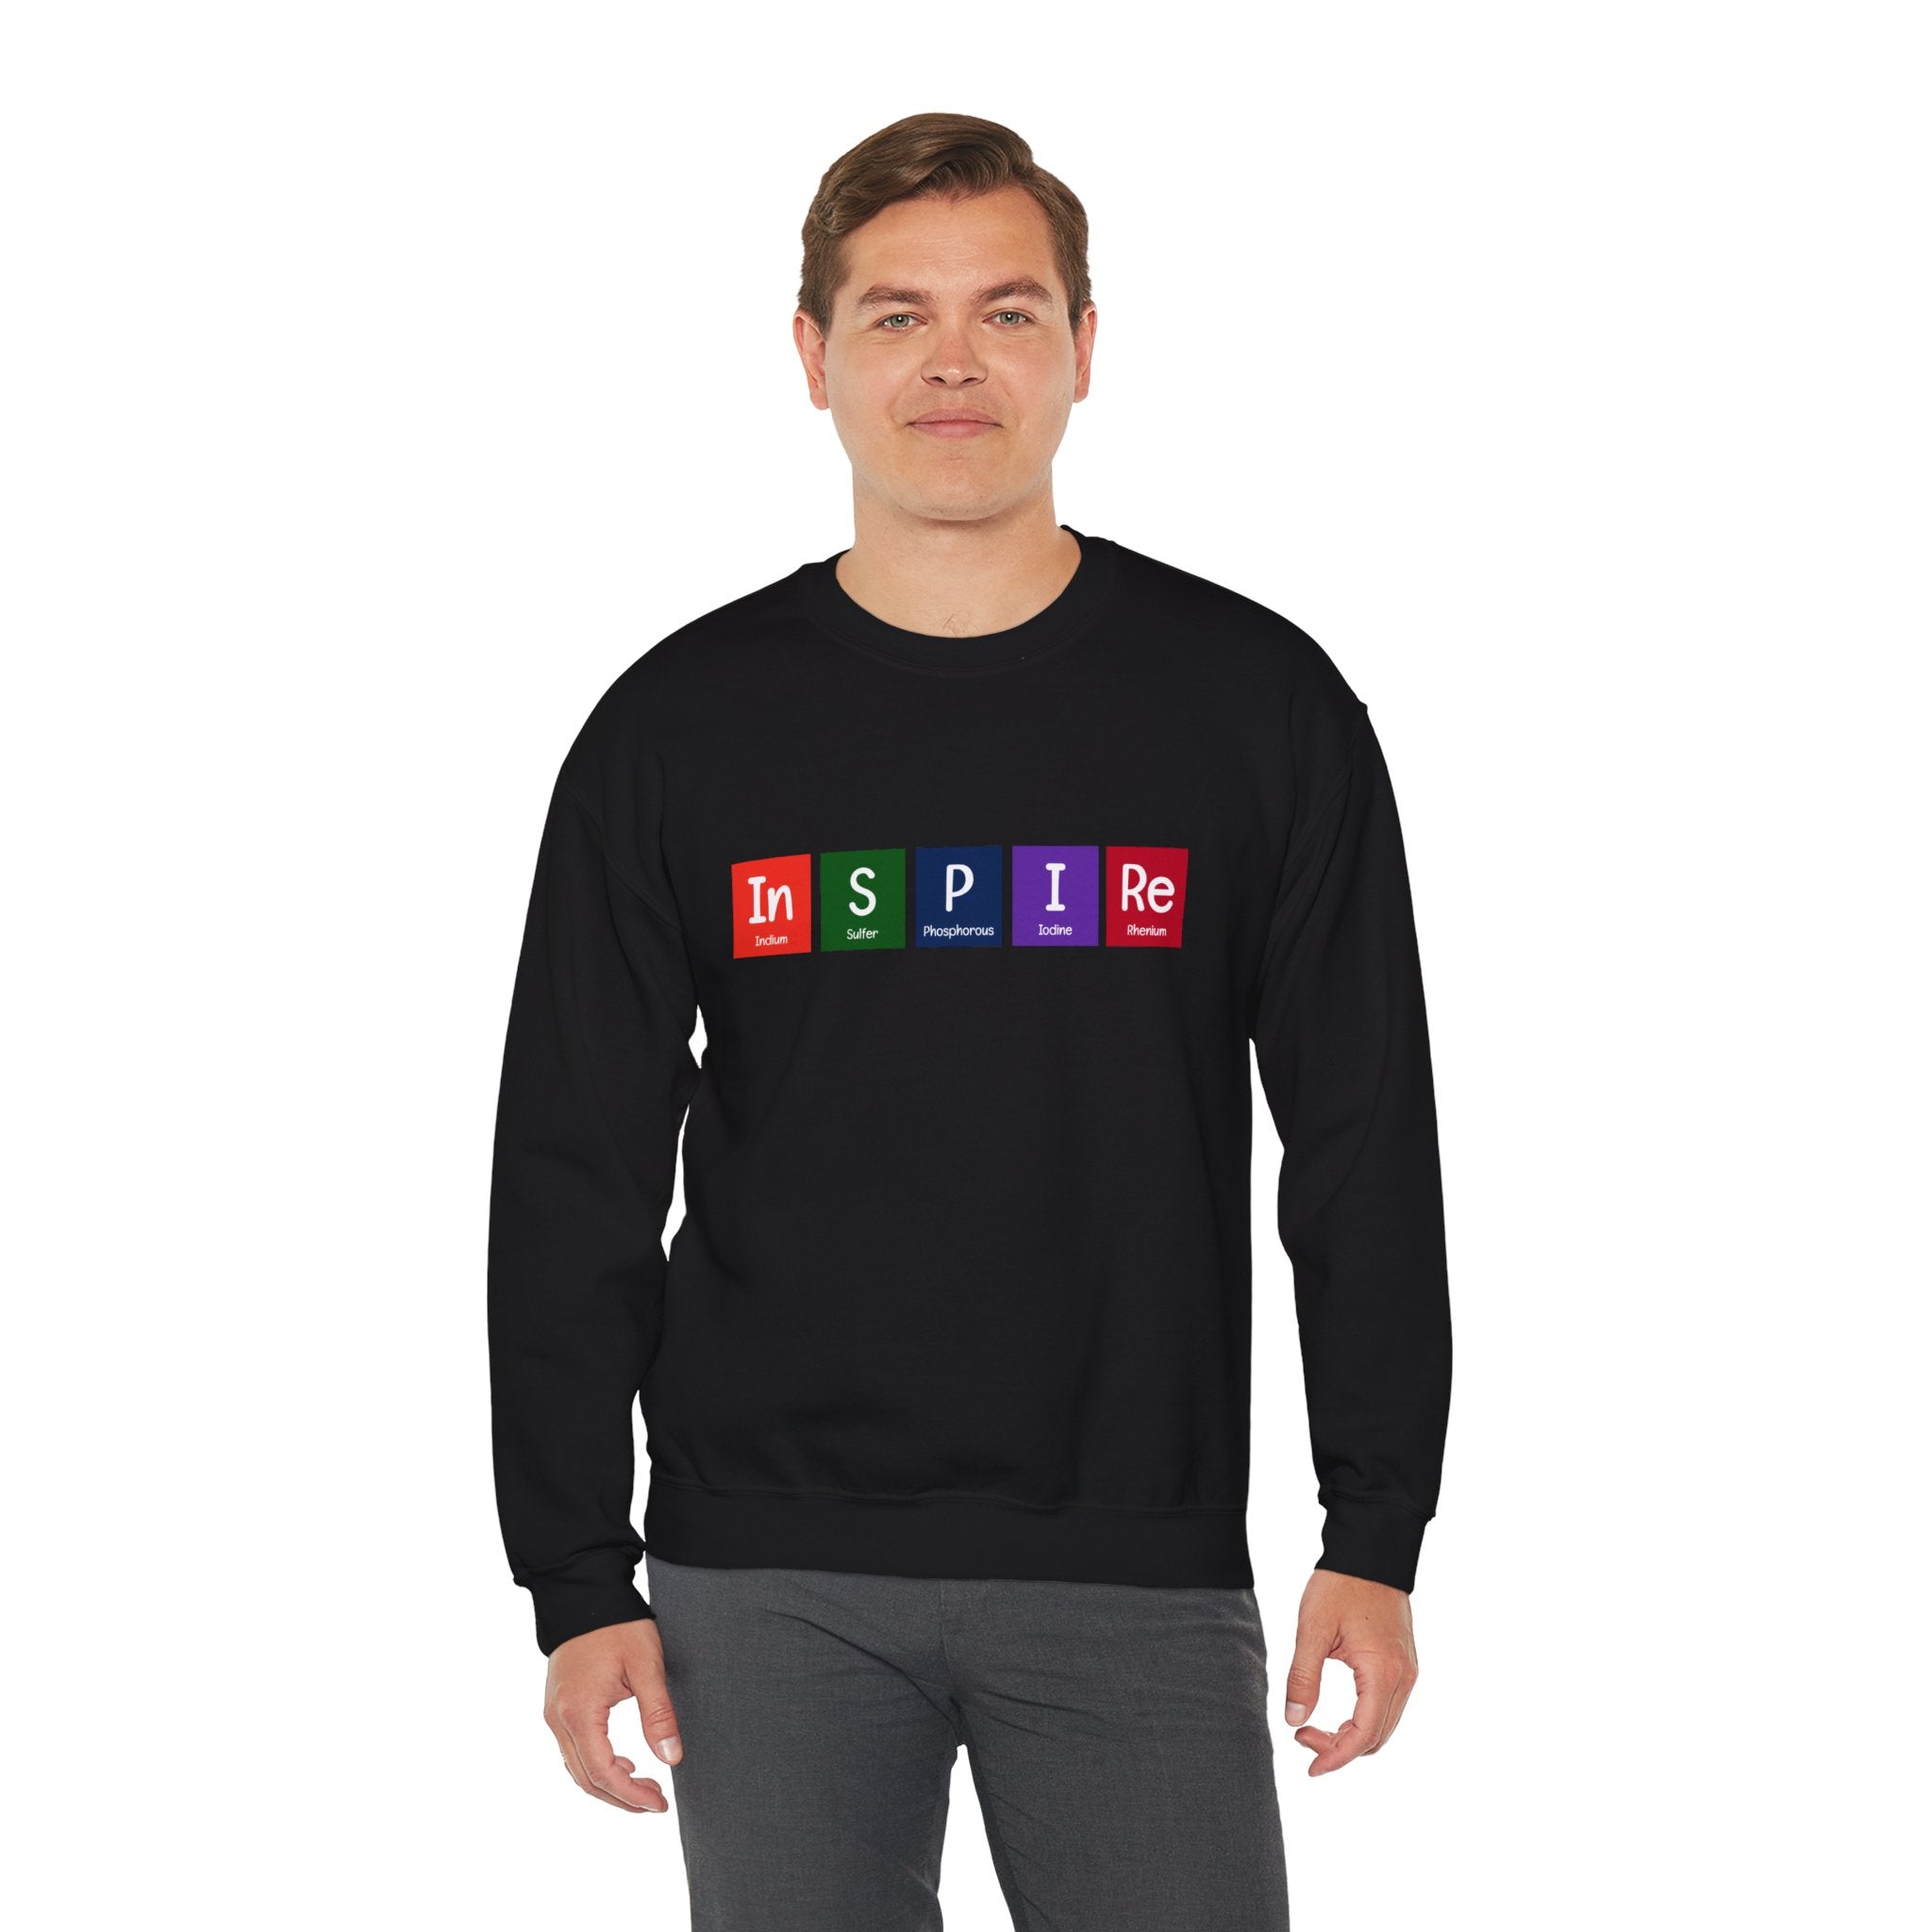 A person is shown wearing a cozy In-S-P-I-Re - Sweatshirt, perfect for inspiration during the colder months.